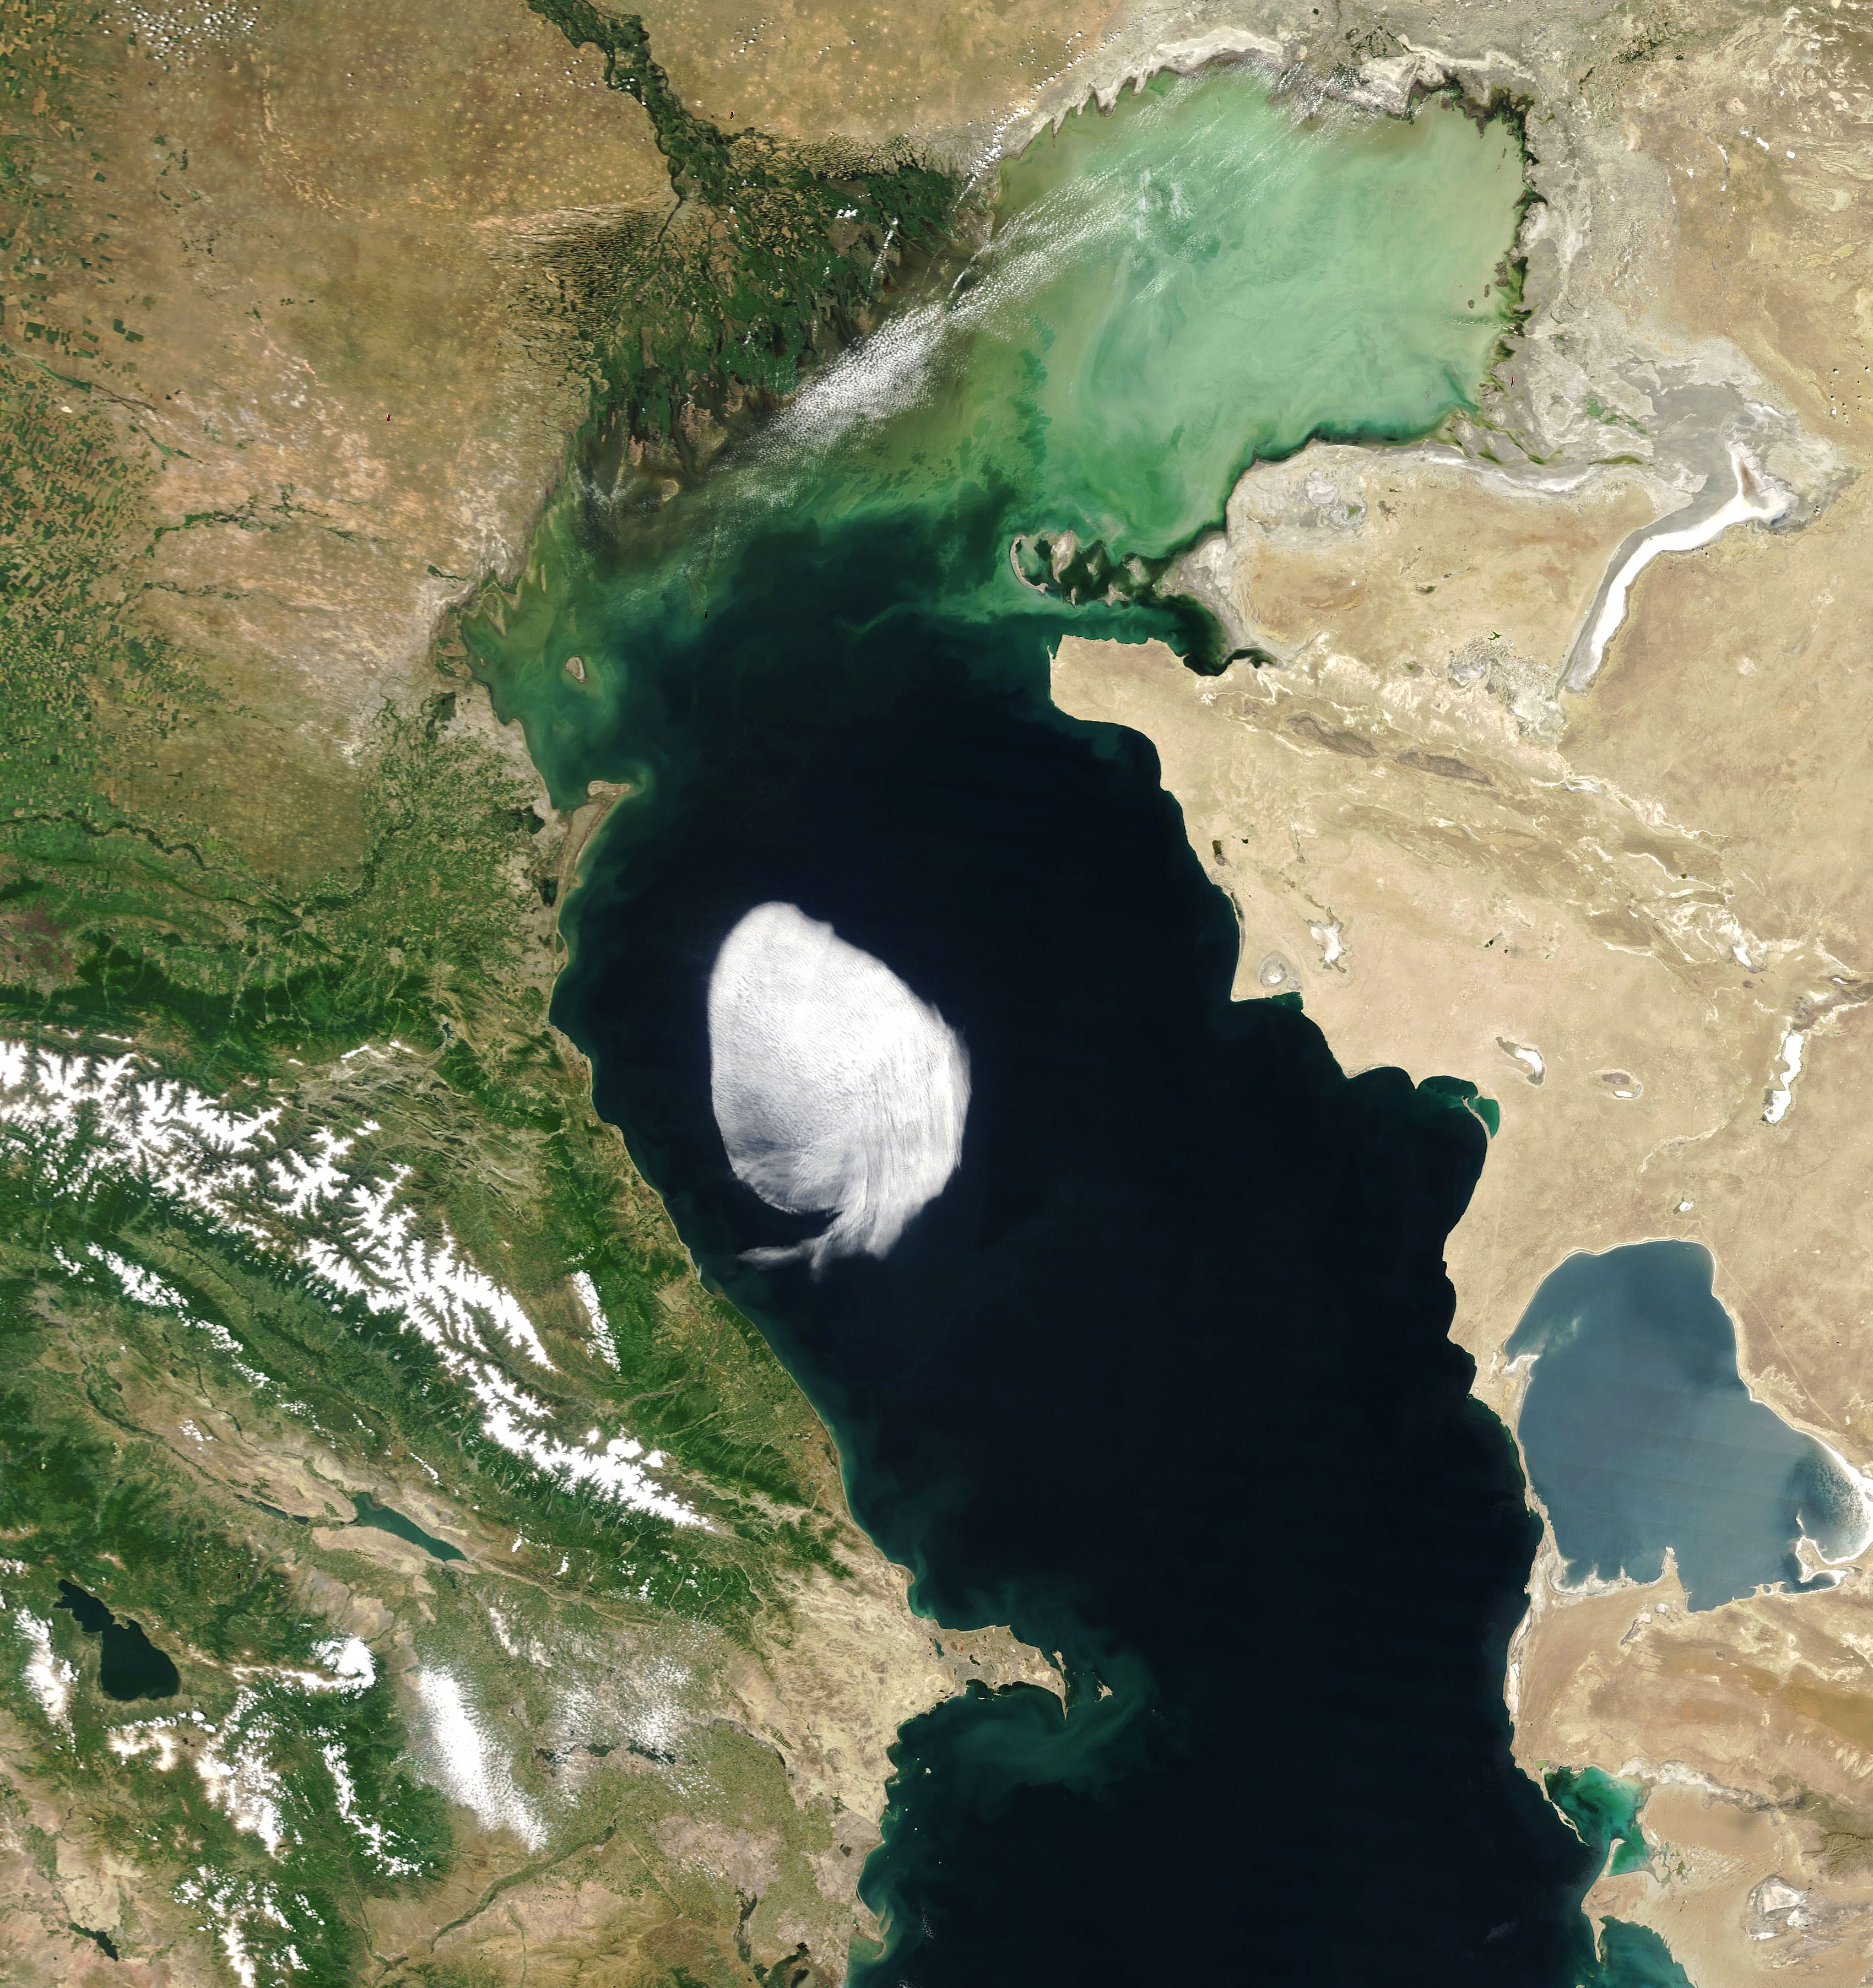 Peculiar Cloud Over the Caspian - related image preview